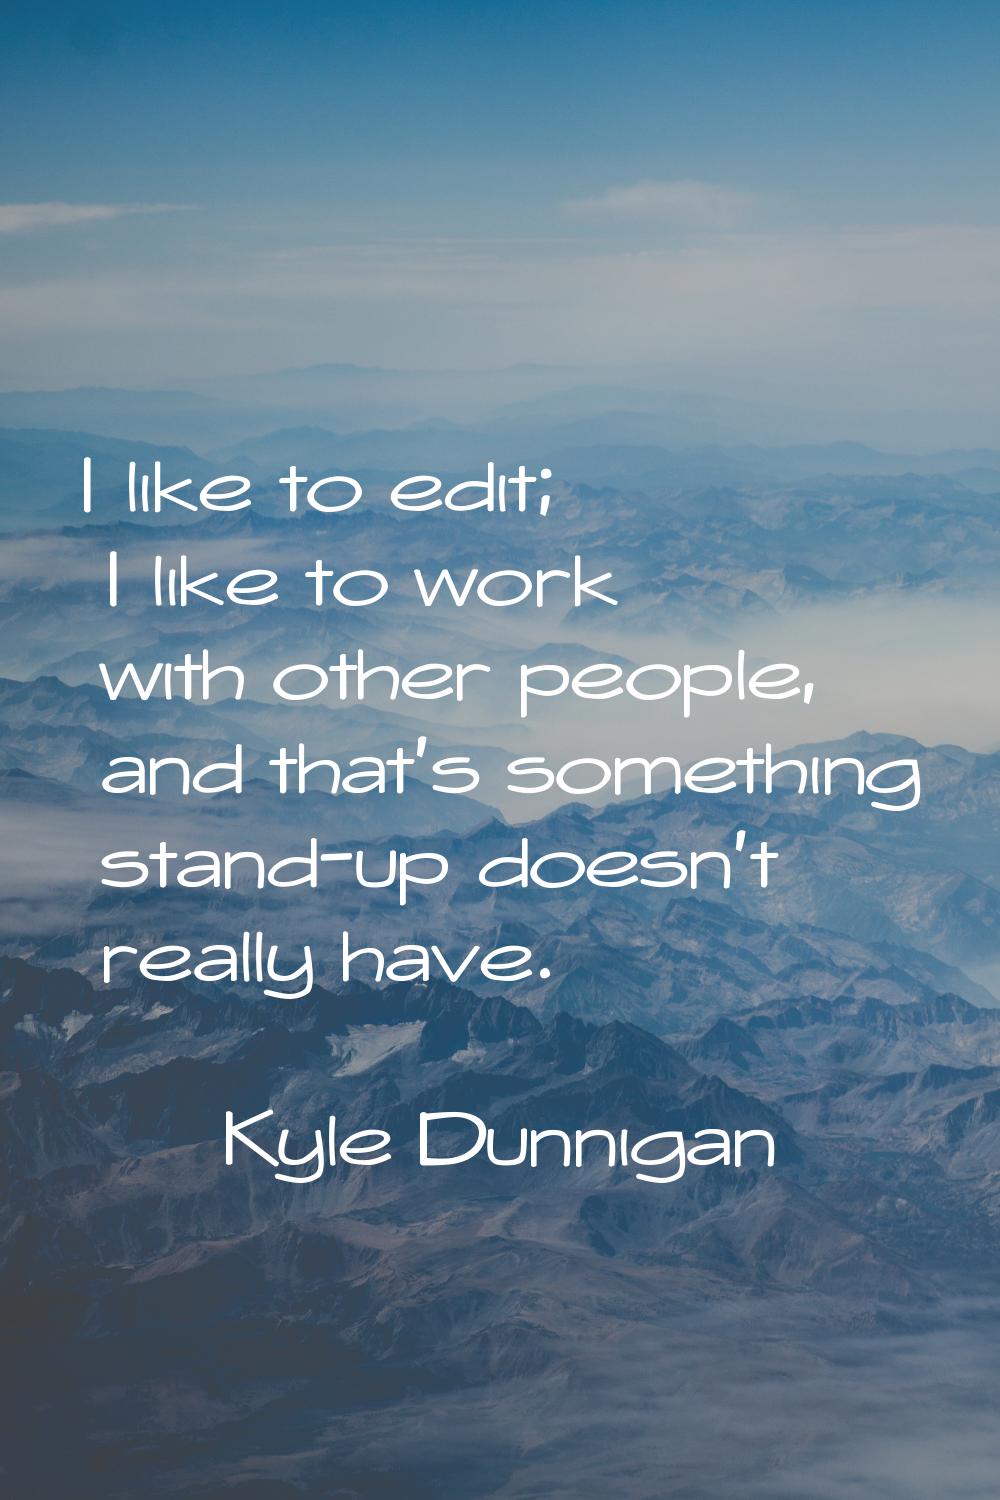 I like to edit; I like to work with other people, and that's something stand-up doesn't really have